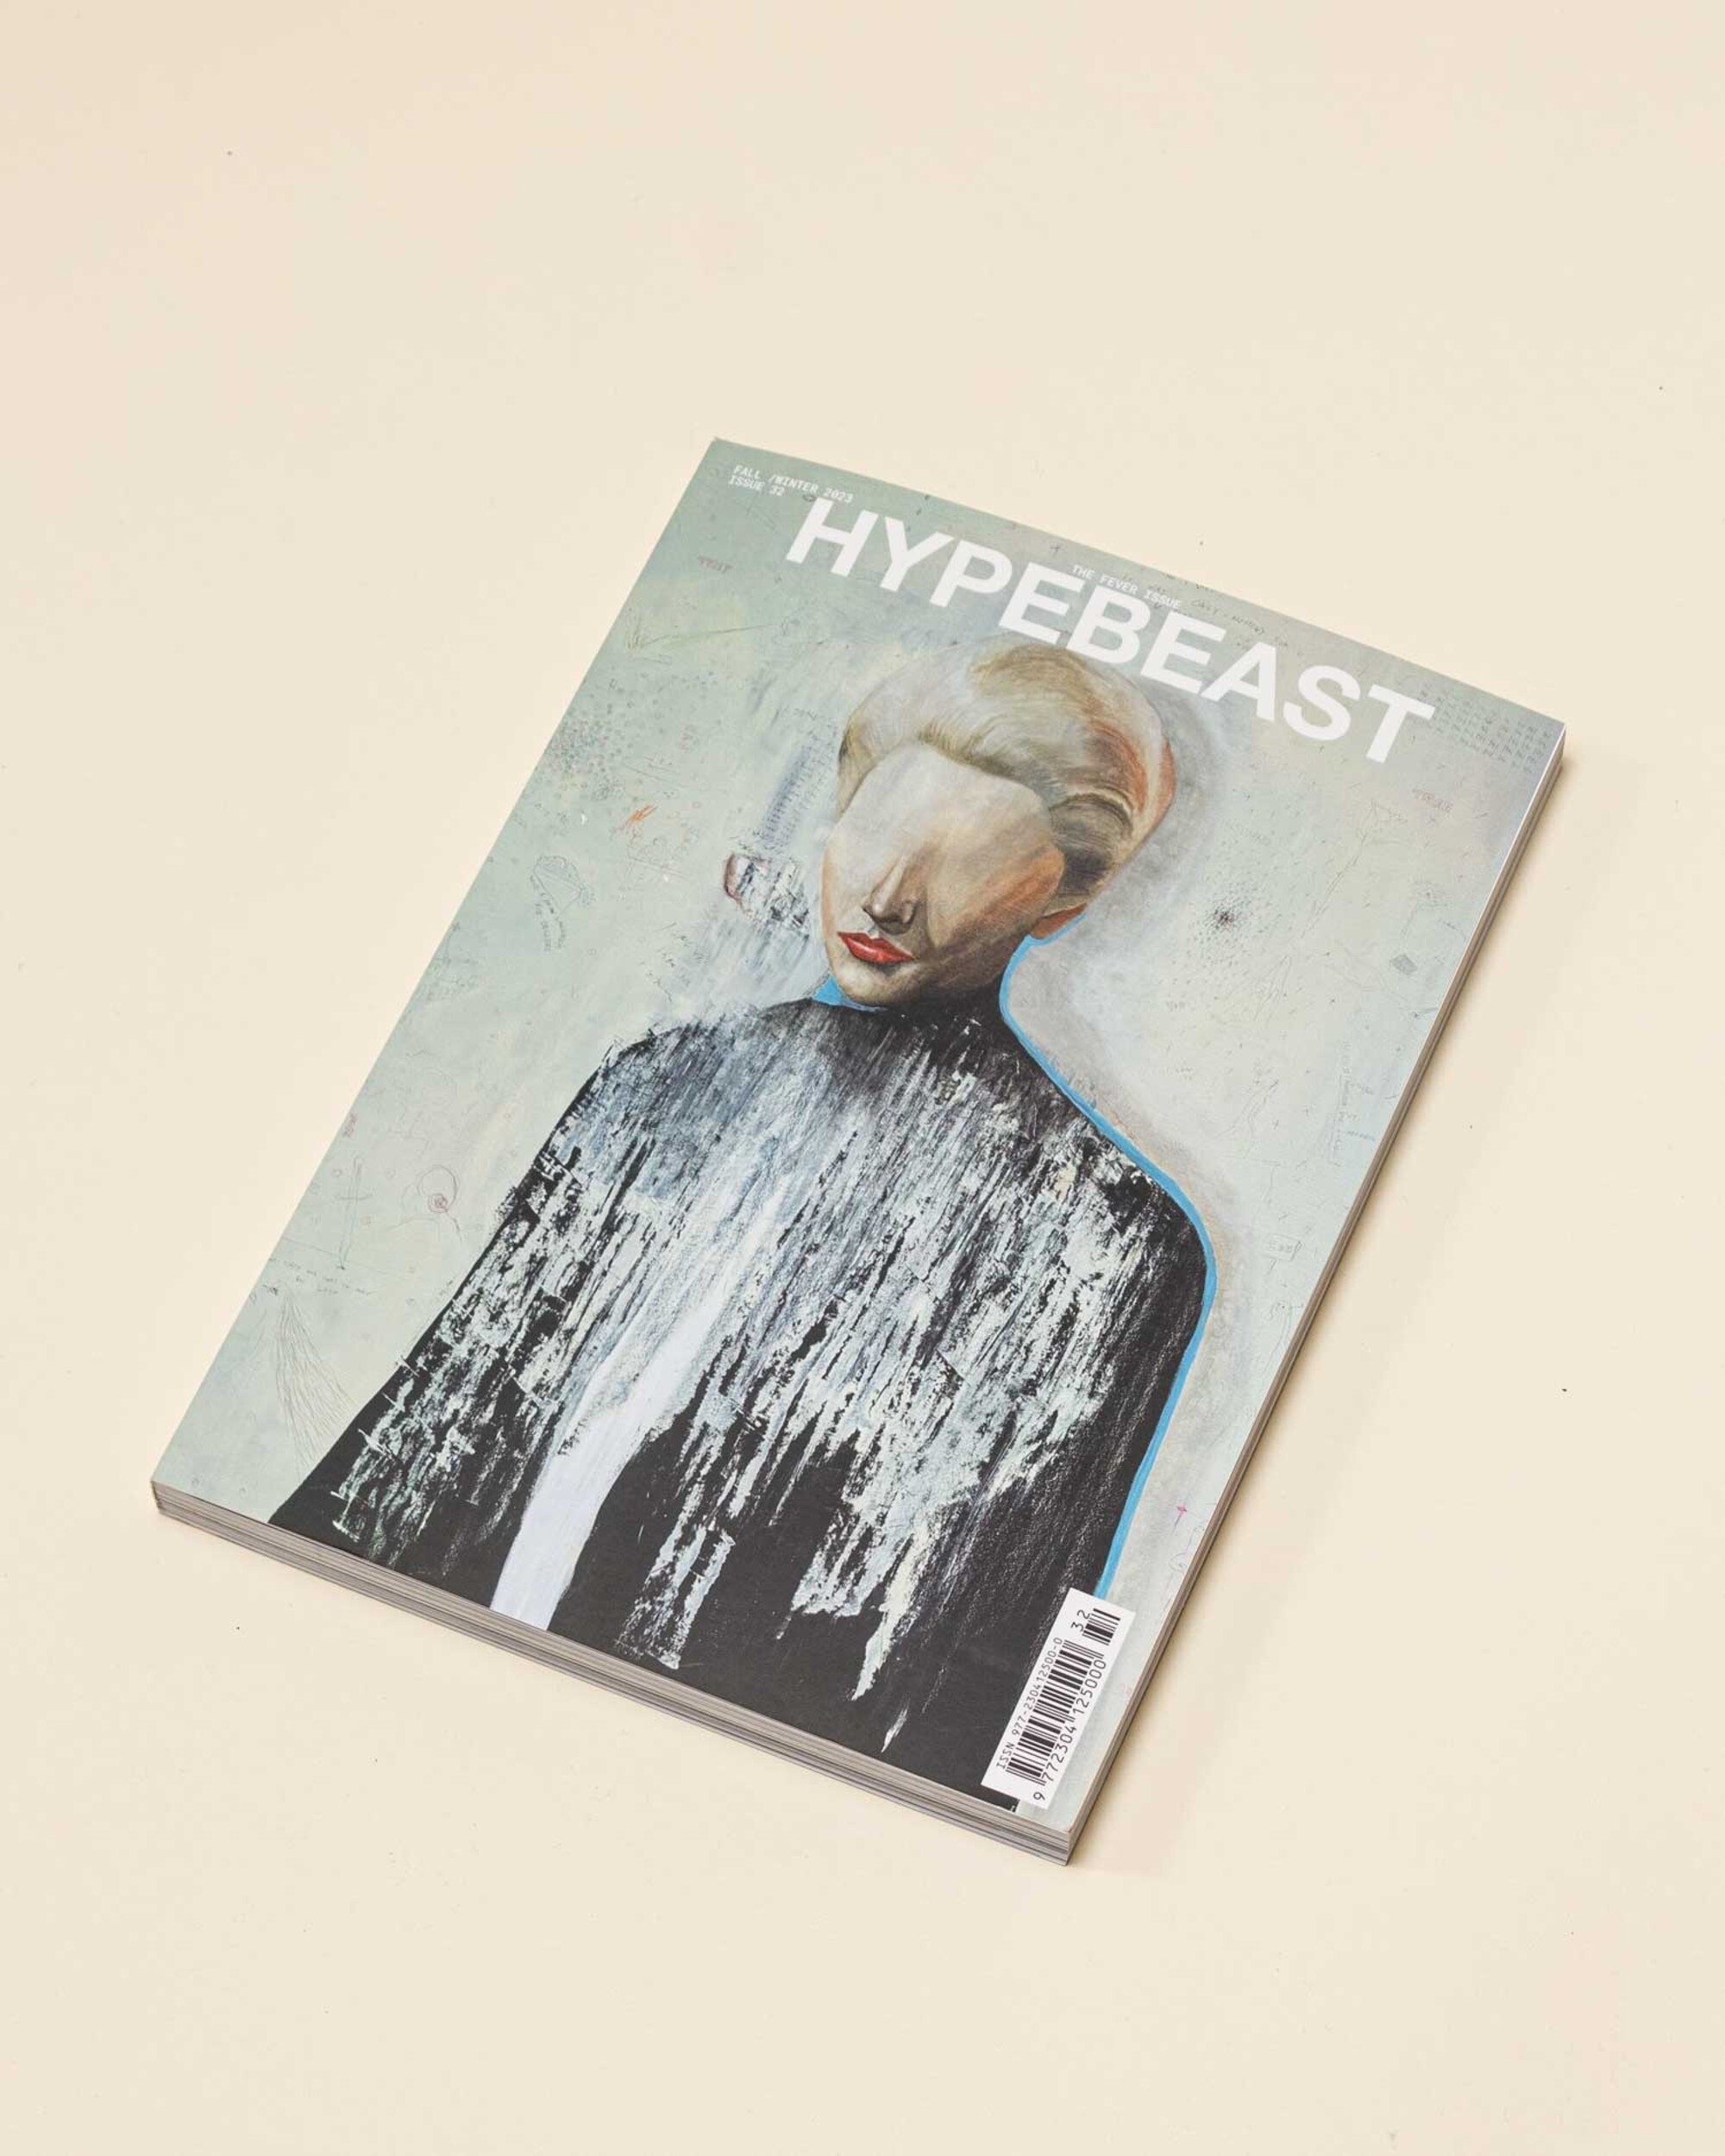 HYPEBEAST Magazine Issue 32 - The Fever Issue